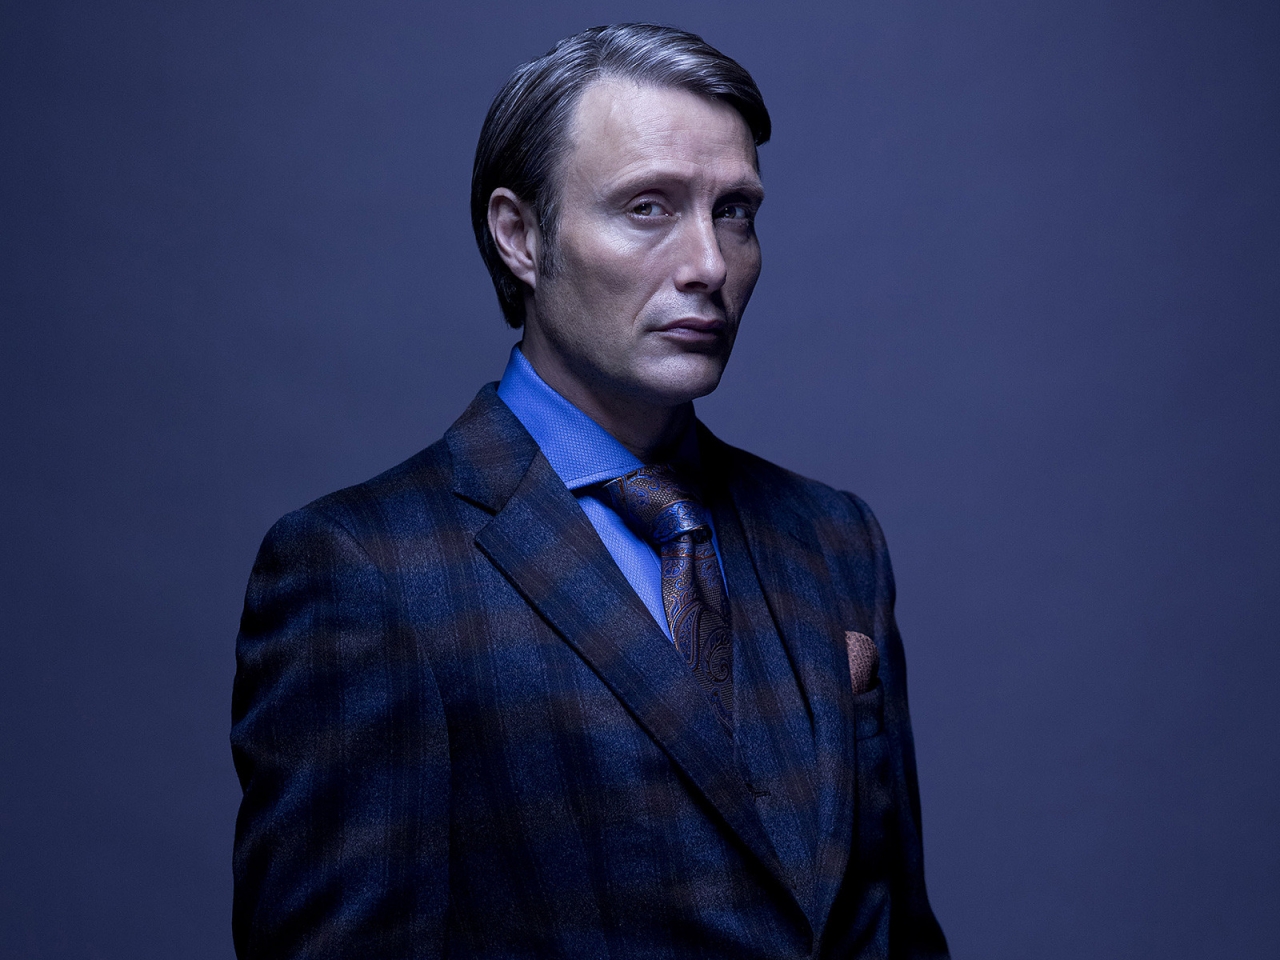 Hannibal Lecter for 1280 x 960 resolution